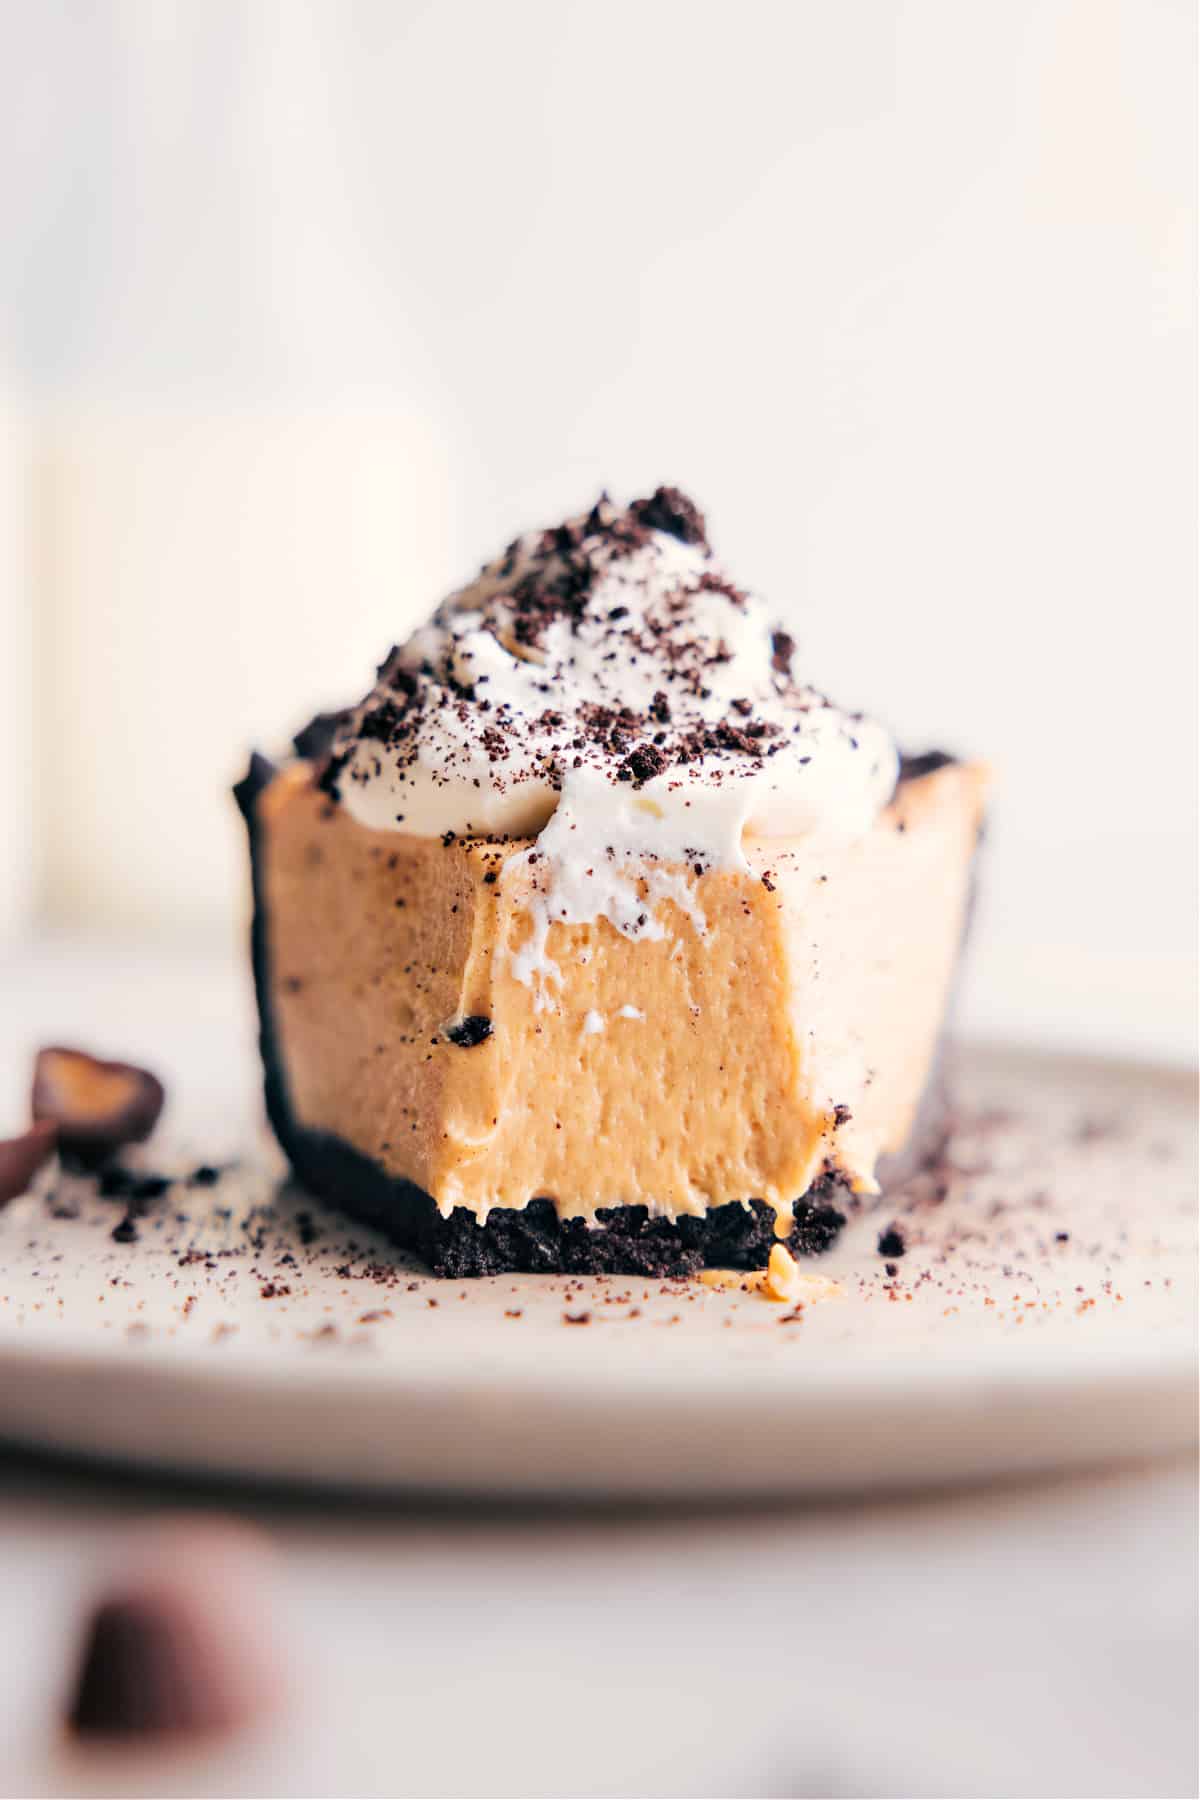 Slice of Peanut Butter Pie with a bite out of it.